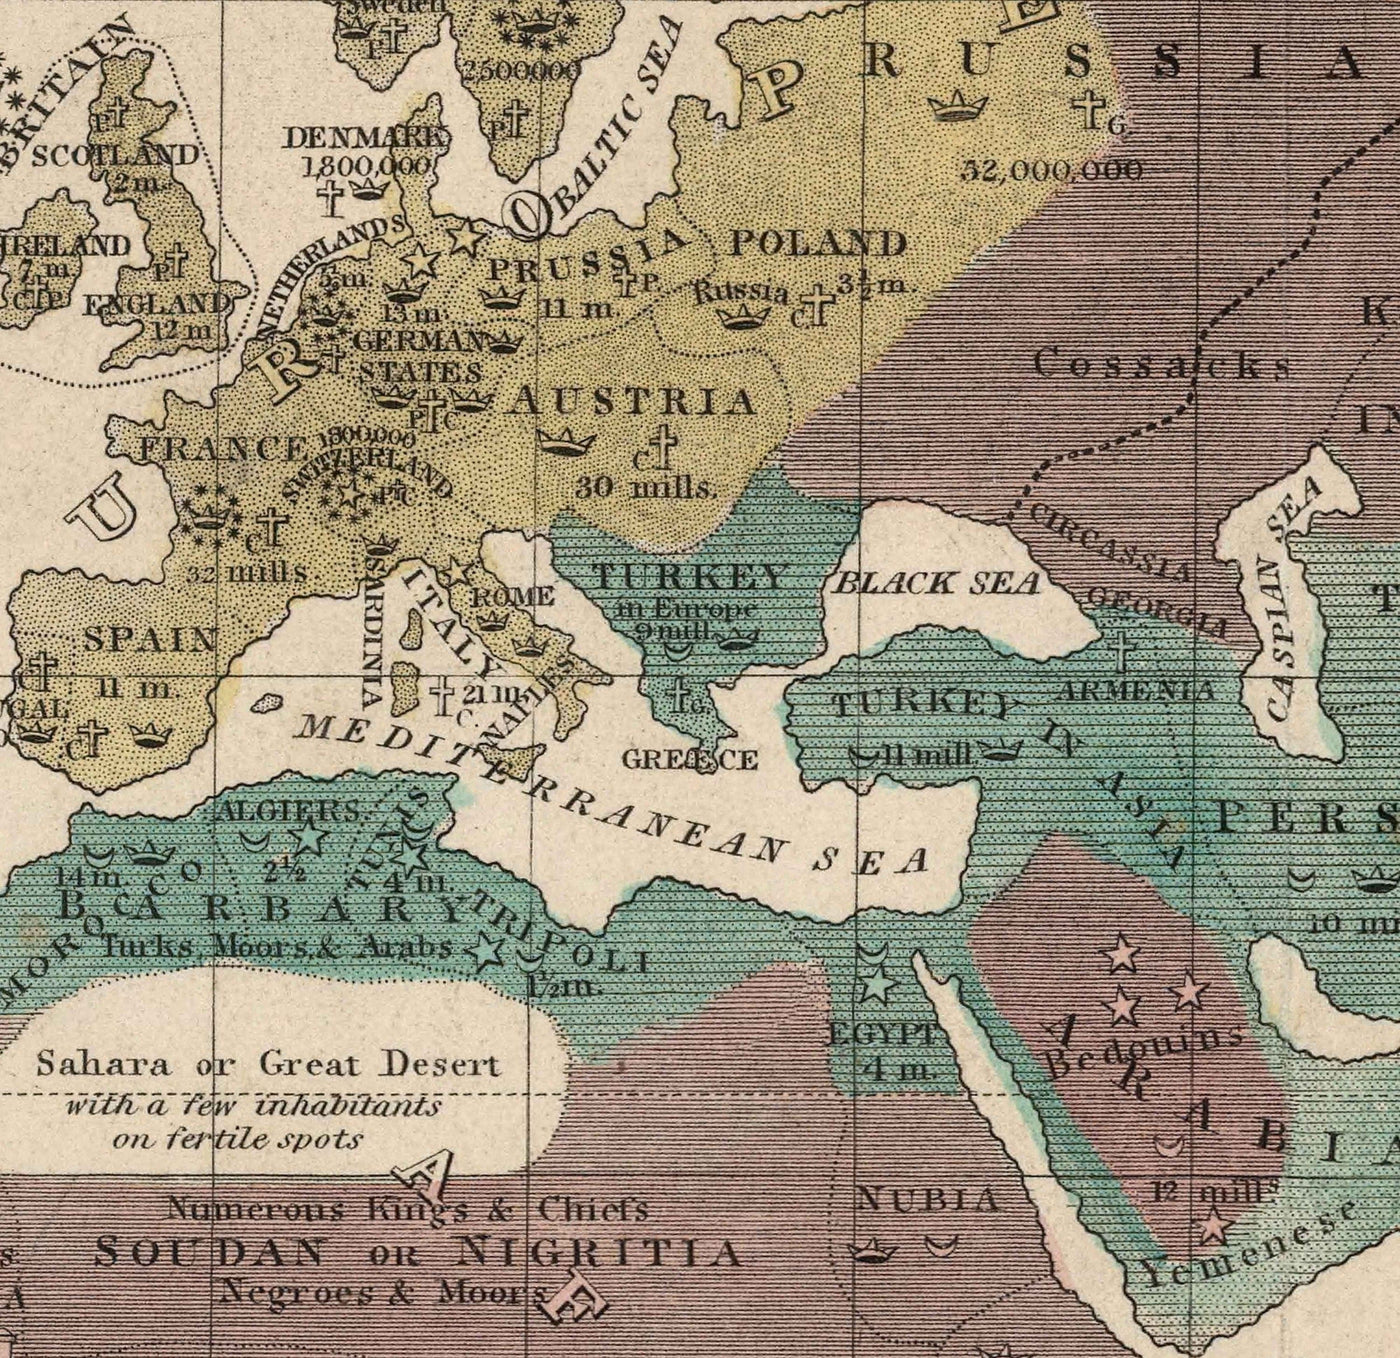 Old Political World Map, 1828 - Historical Religious Beliefs, Government, Civilisation Level, Barbarians & Savages